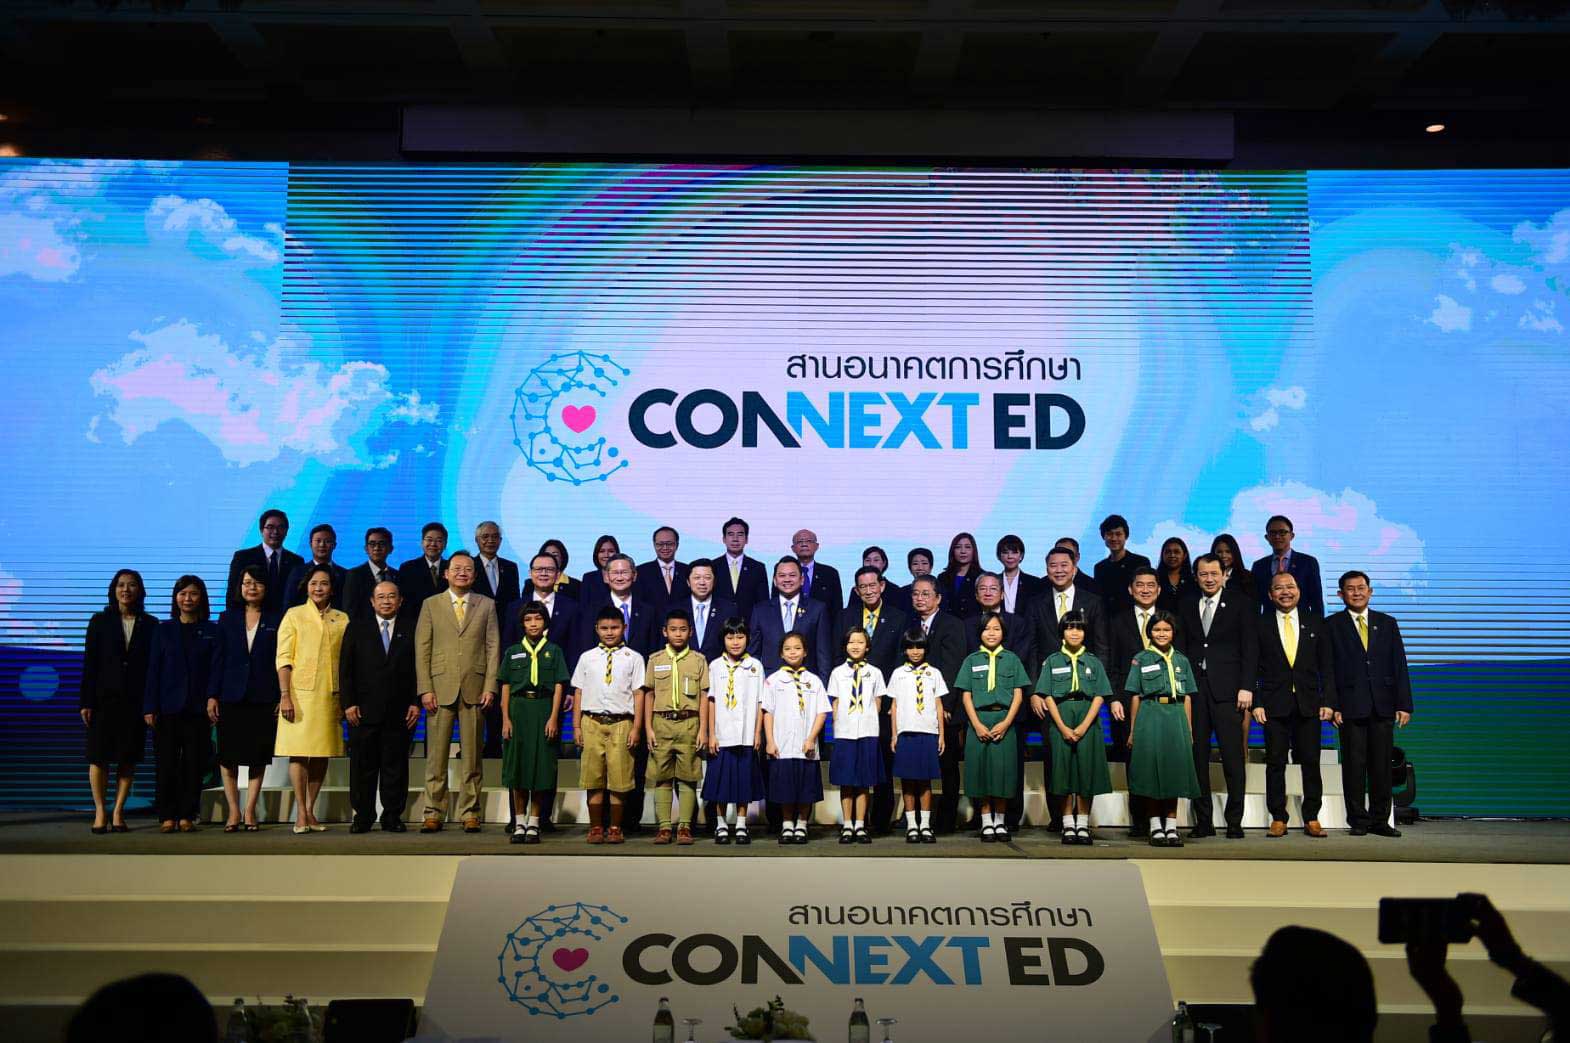 CPF receives honorary plaque for supporting The CONNEXT ED Project